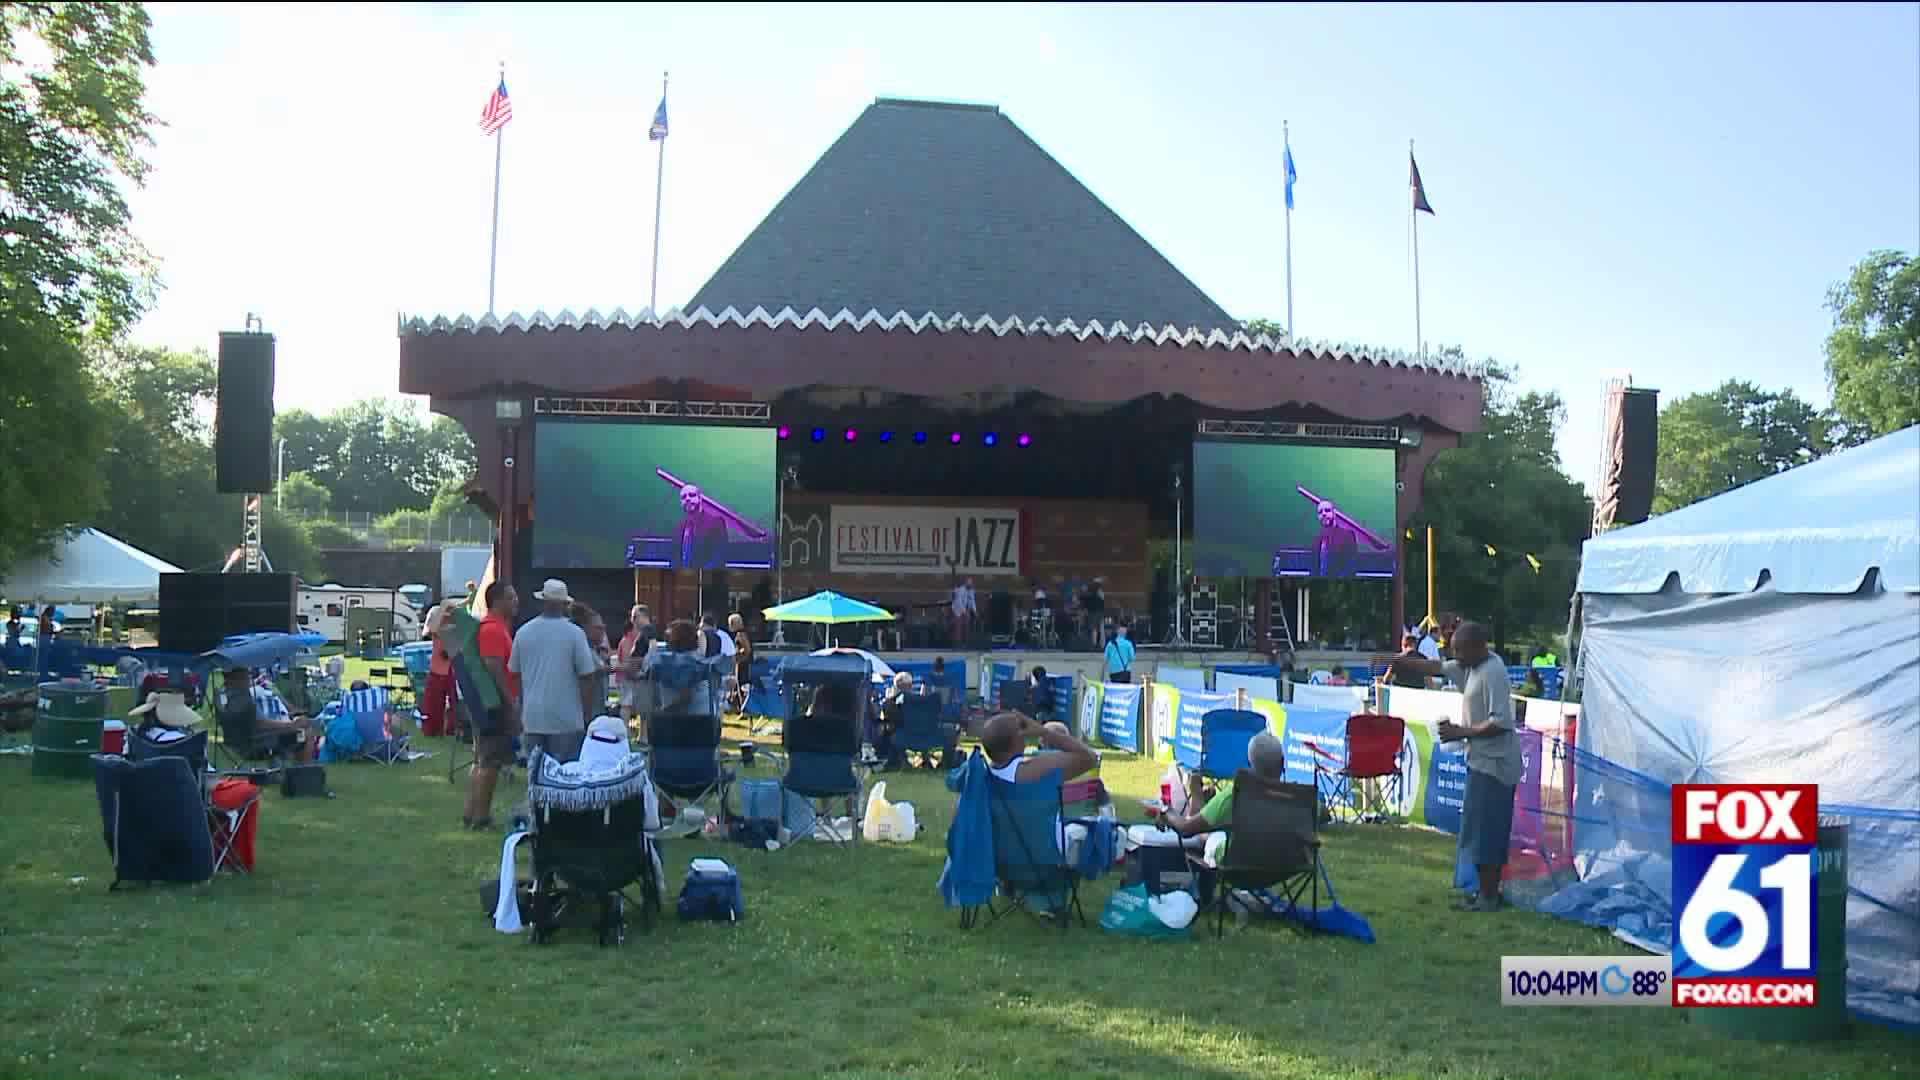 Hartford Festival of Jazz brings in thousands